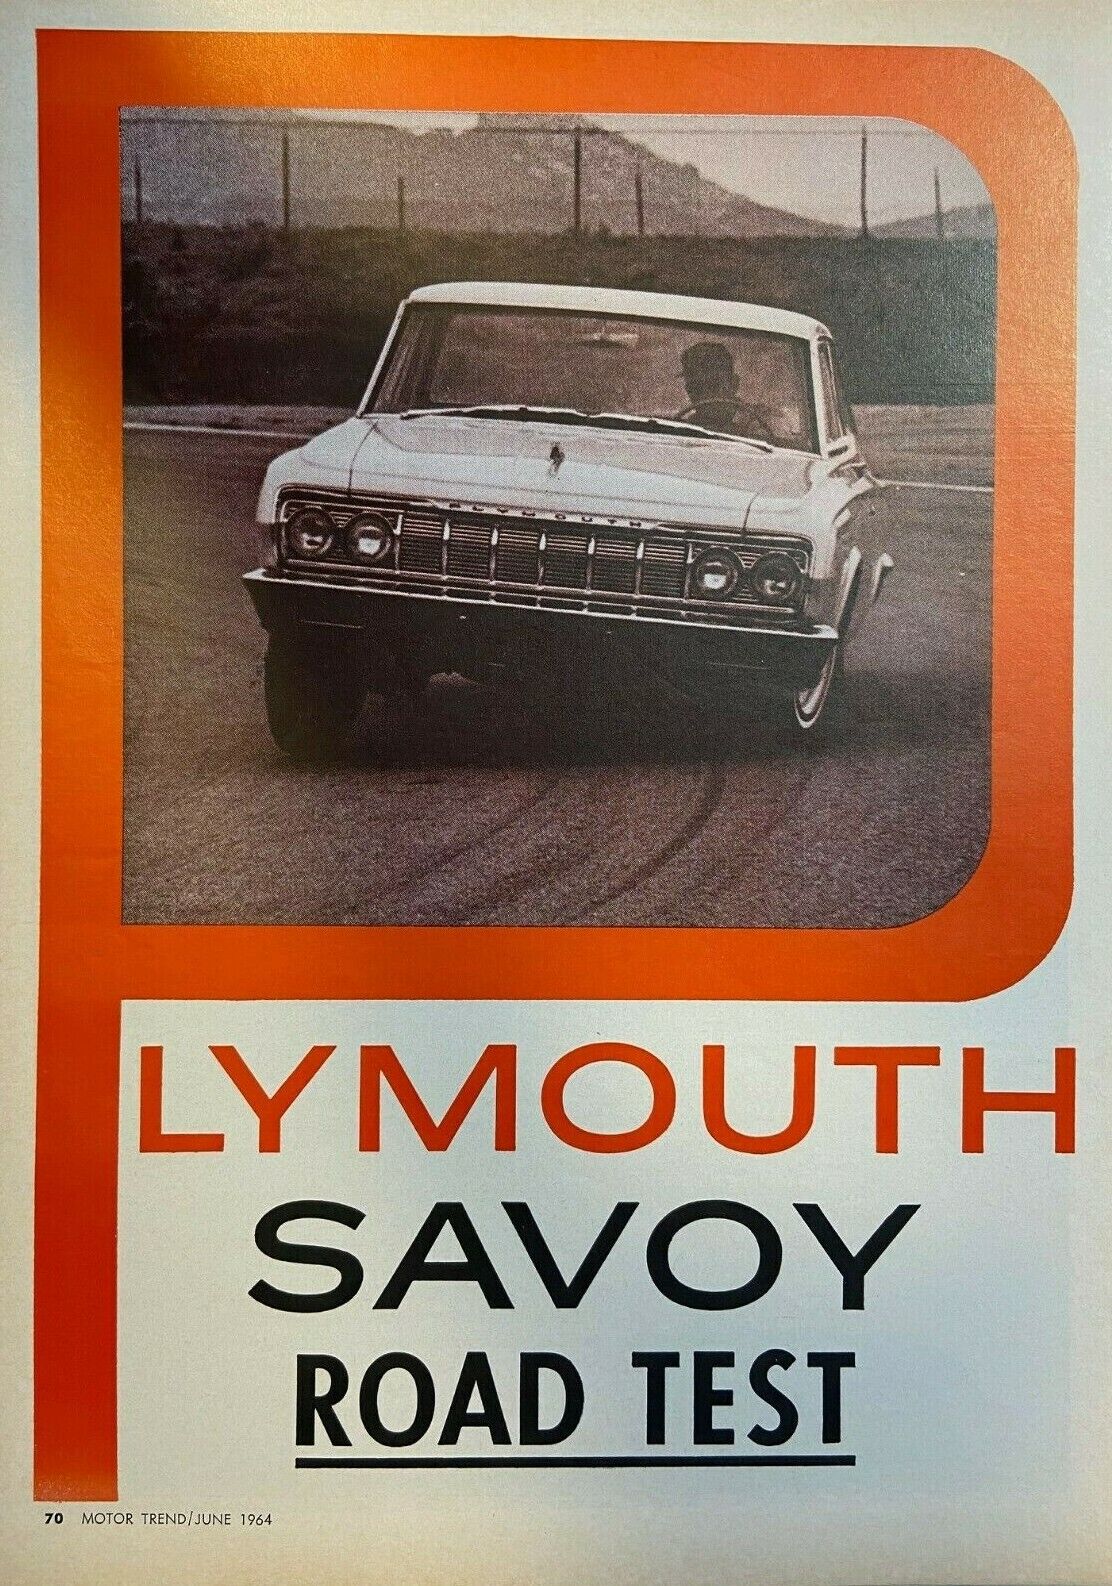 1964 Plymouth Savoy Road Test illustrated